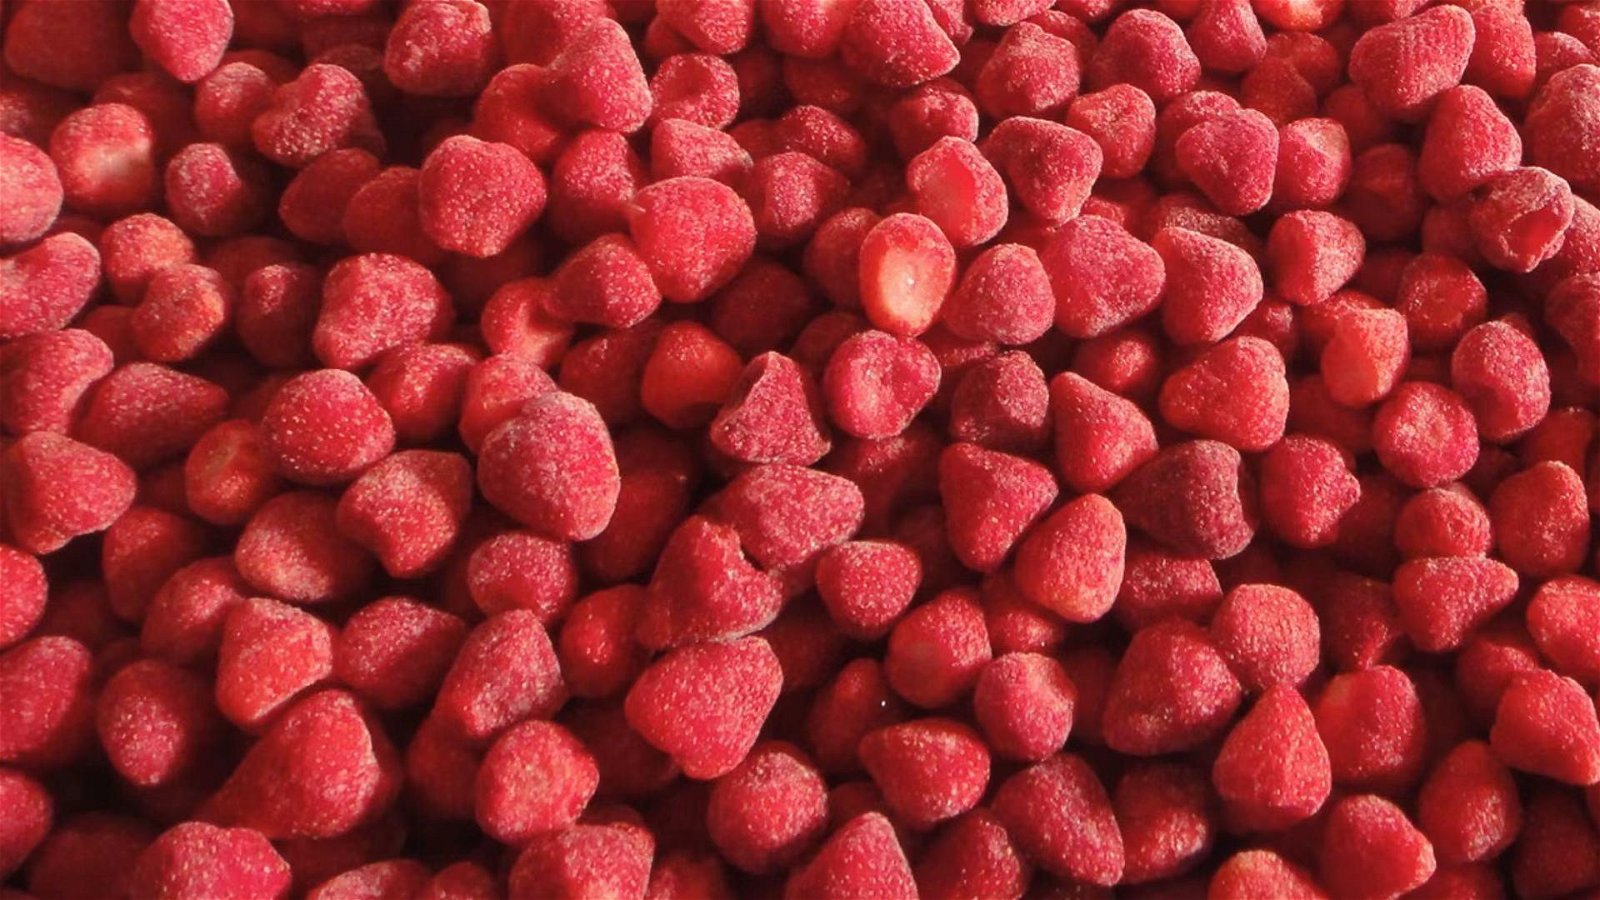 IQF Strawberries,Frozen Whole Strawberries,IQF Strawberry,American no.13 variety 4